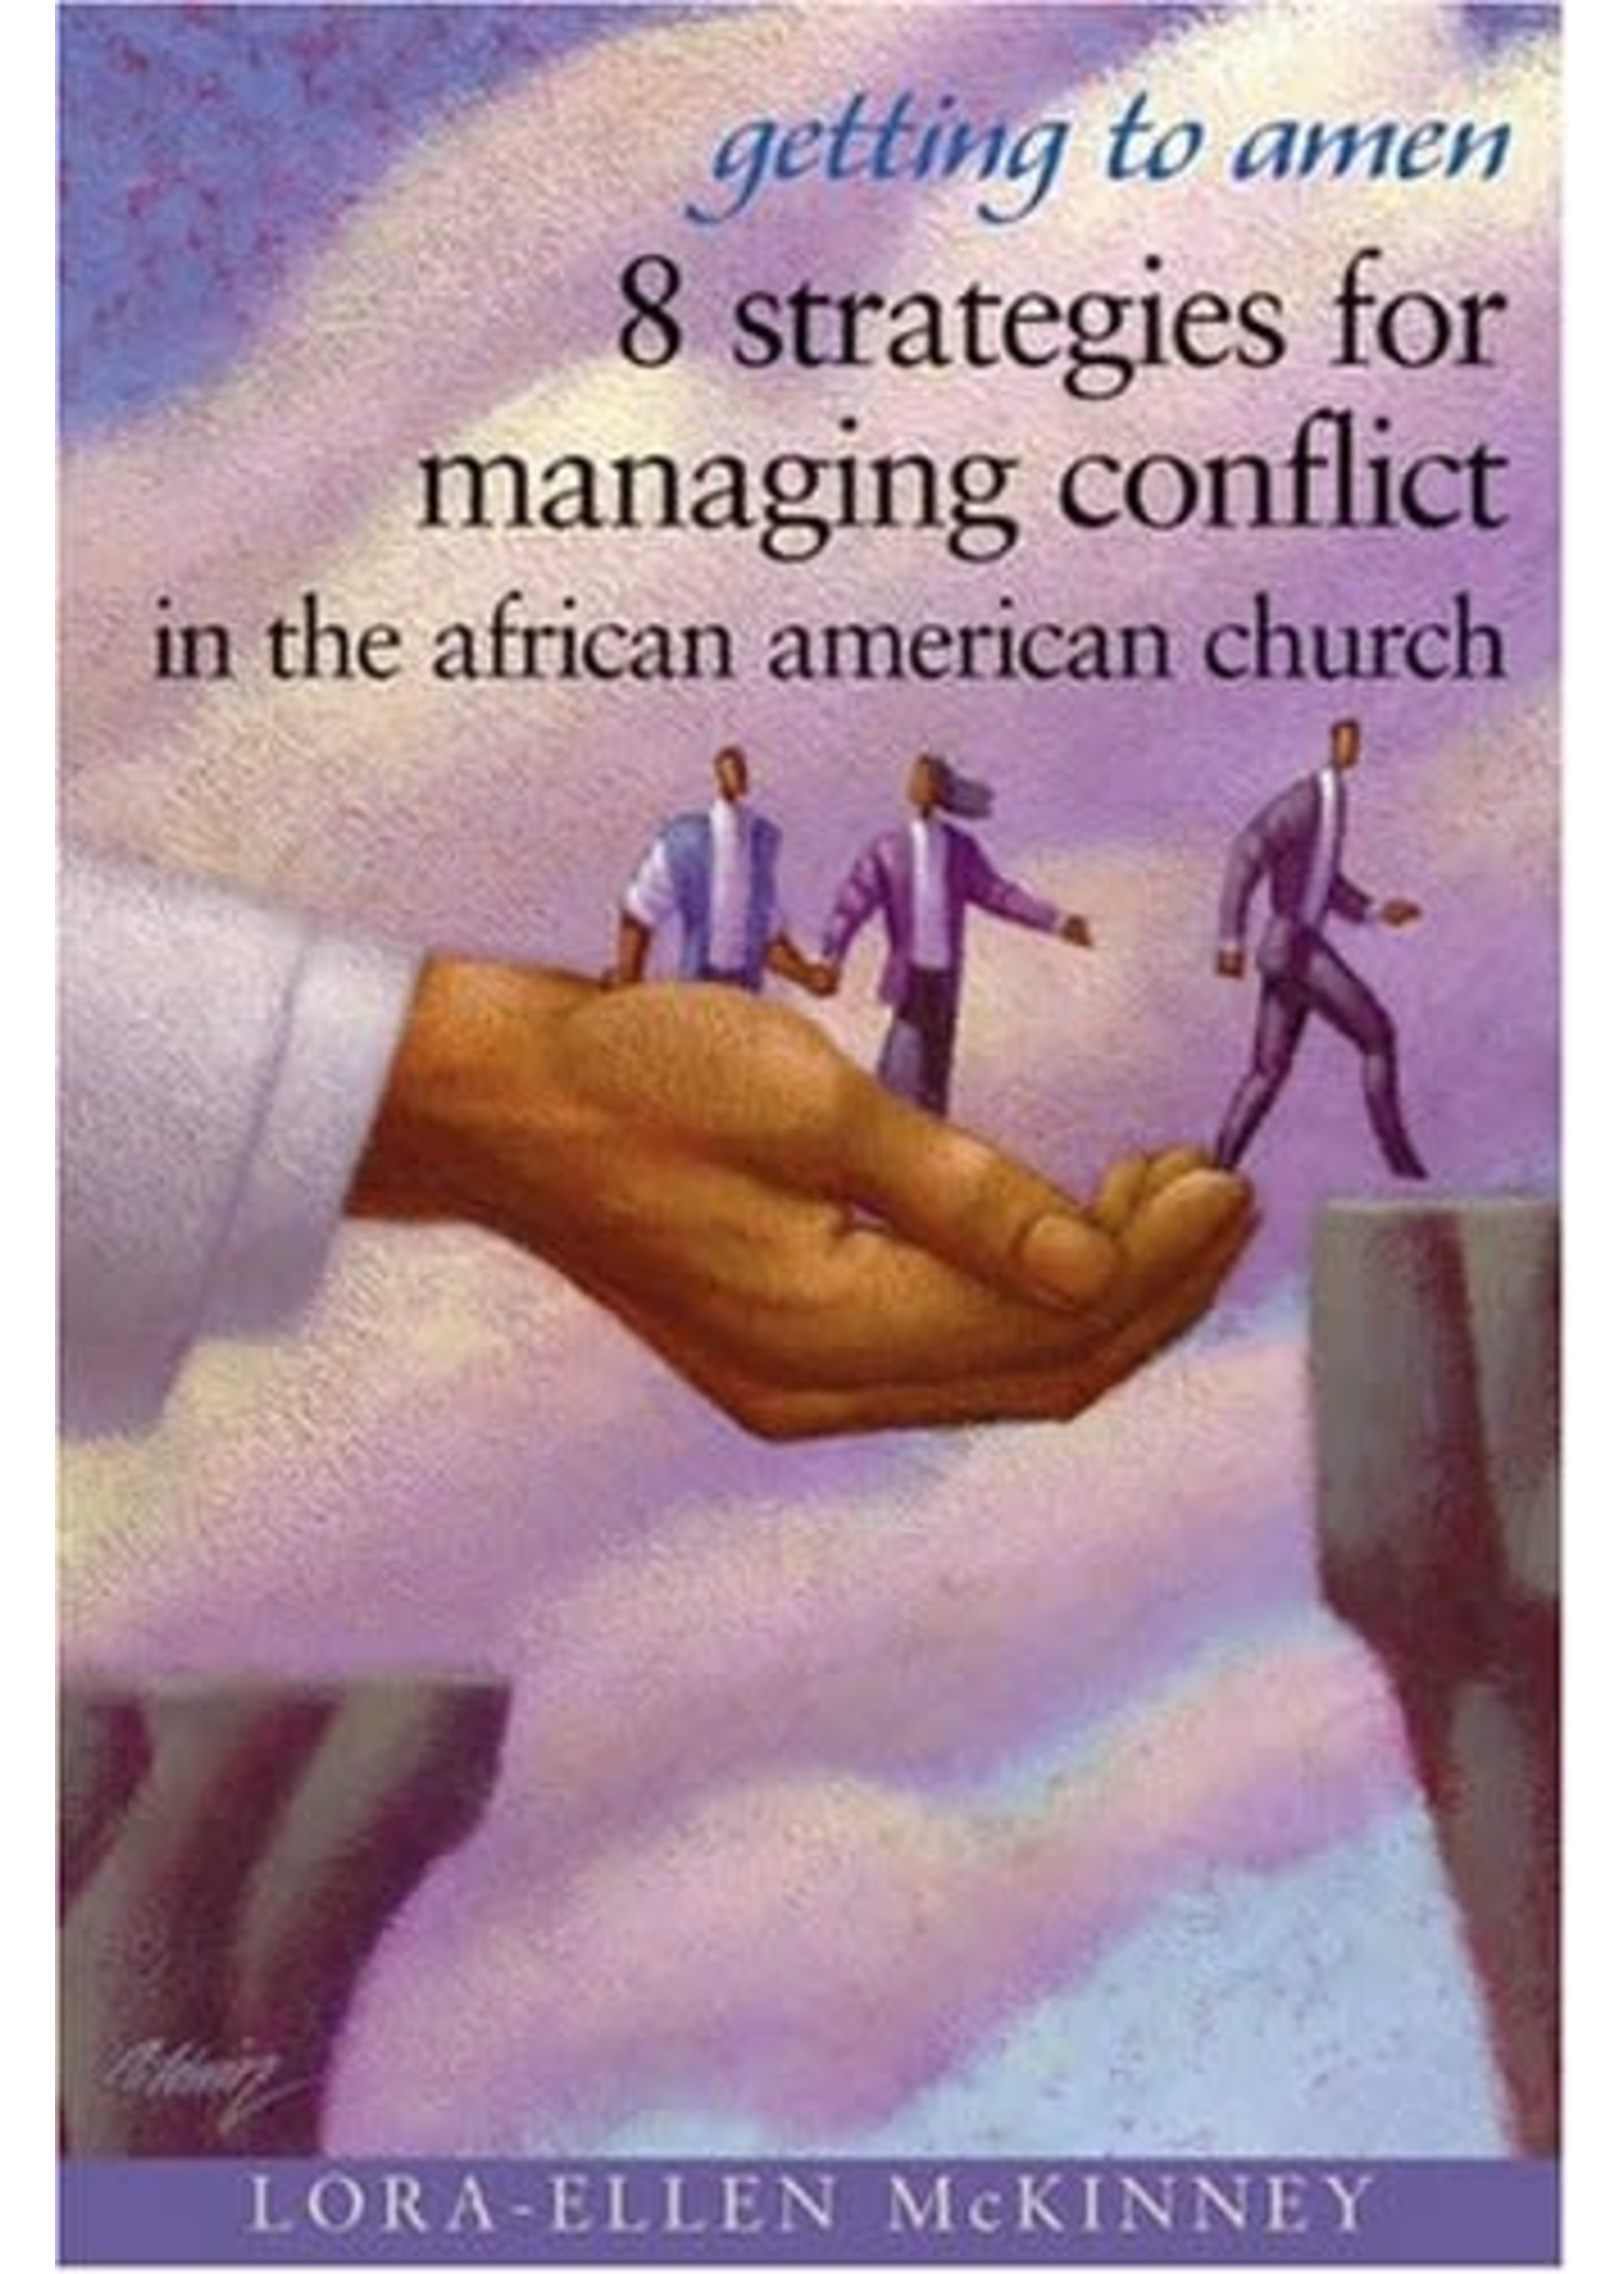 Getting To Amen: 8 Strategies For Managing Conflict In The African American Church